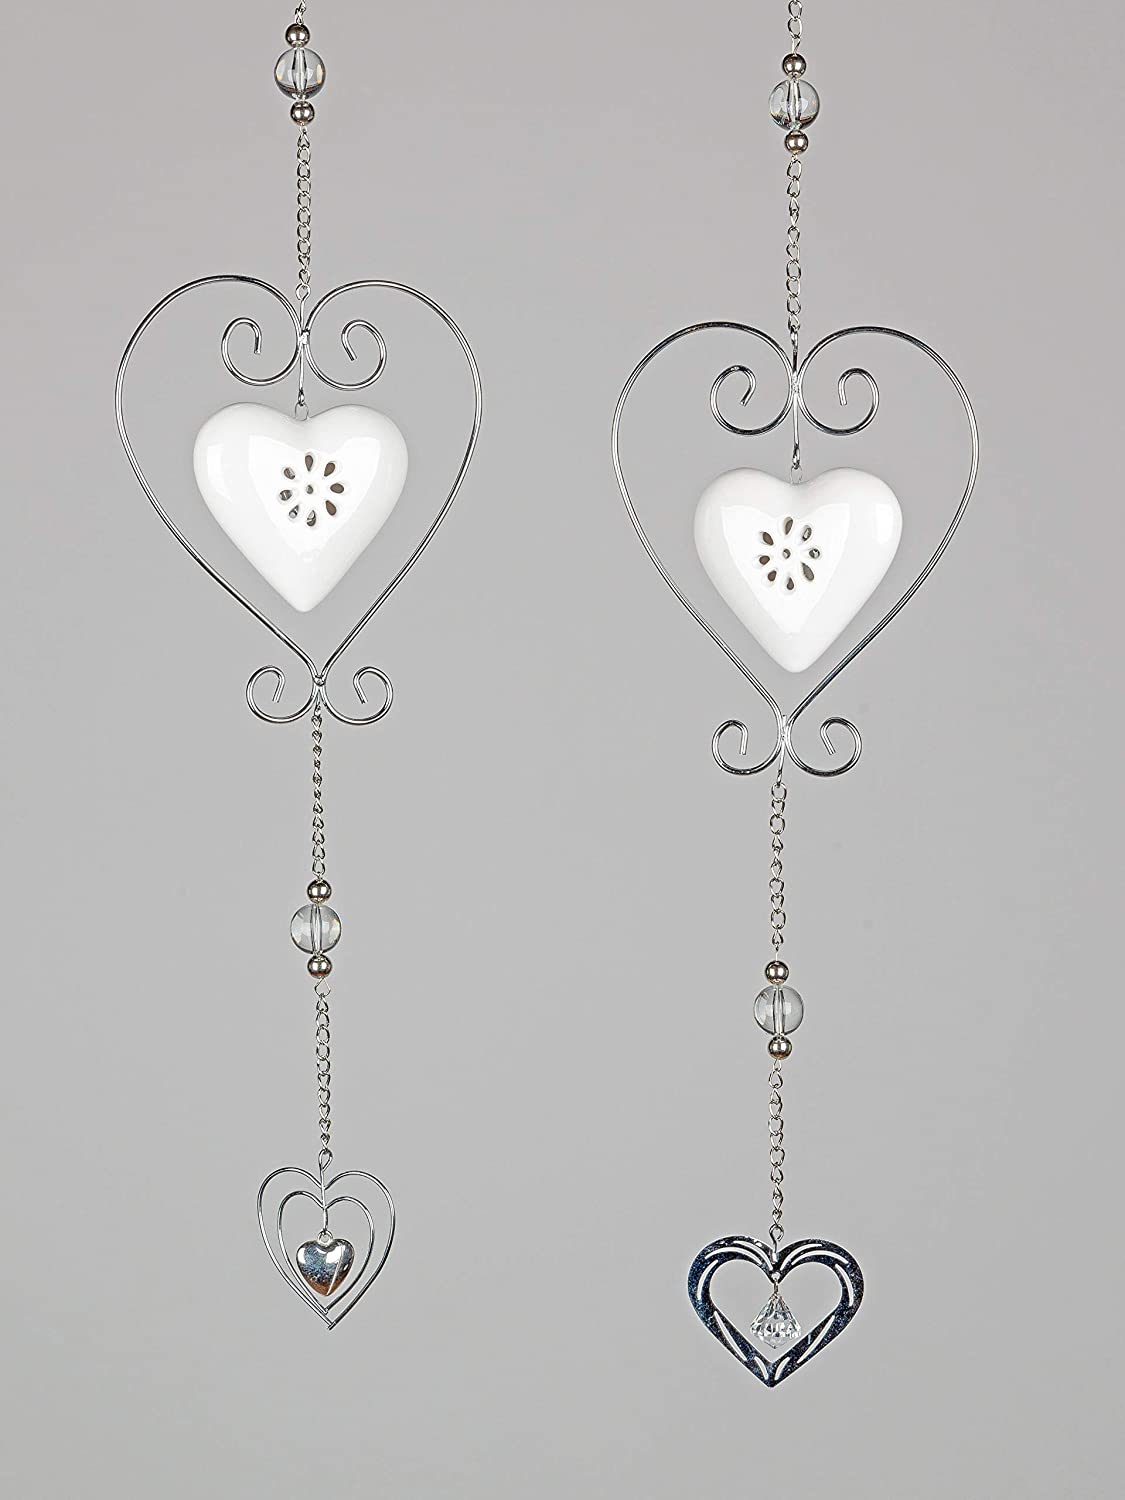 Formano Set Of 2 Decorative Hanging Hearts L. 50 Cm White Silver Metal And 